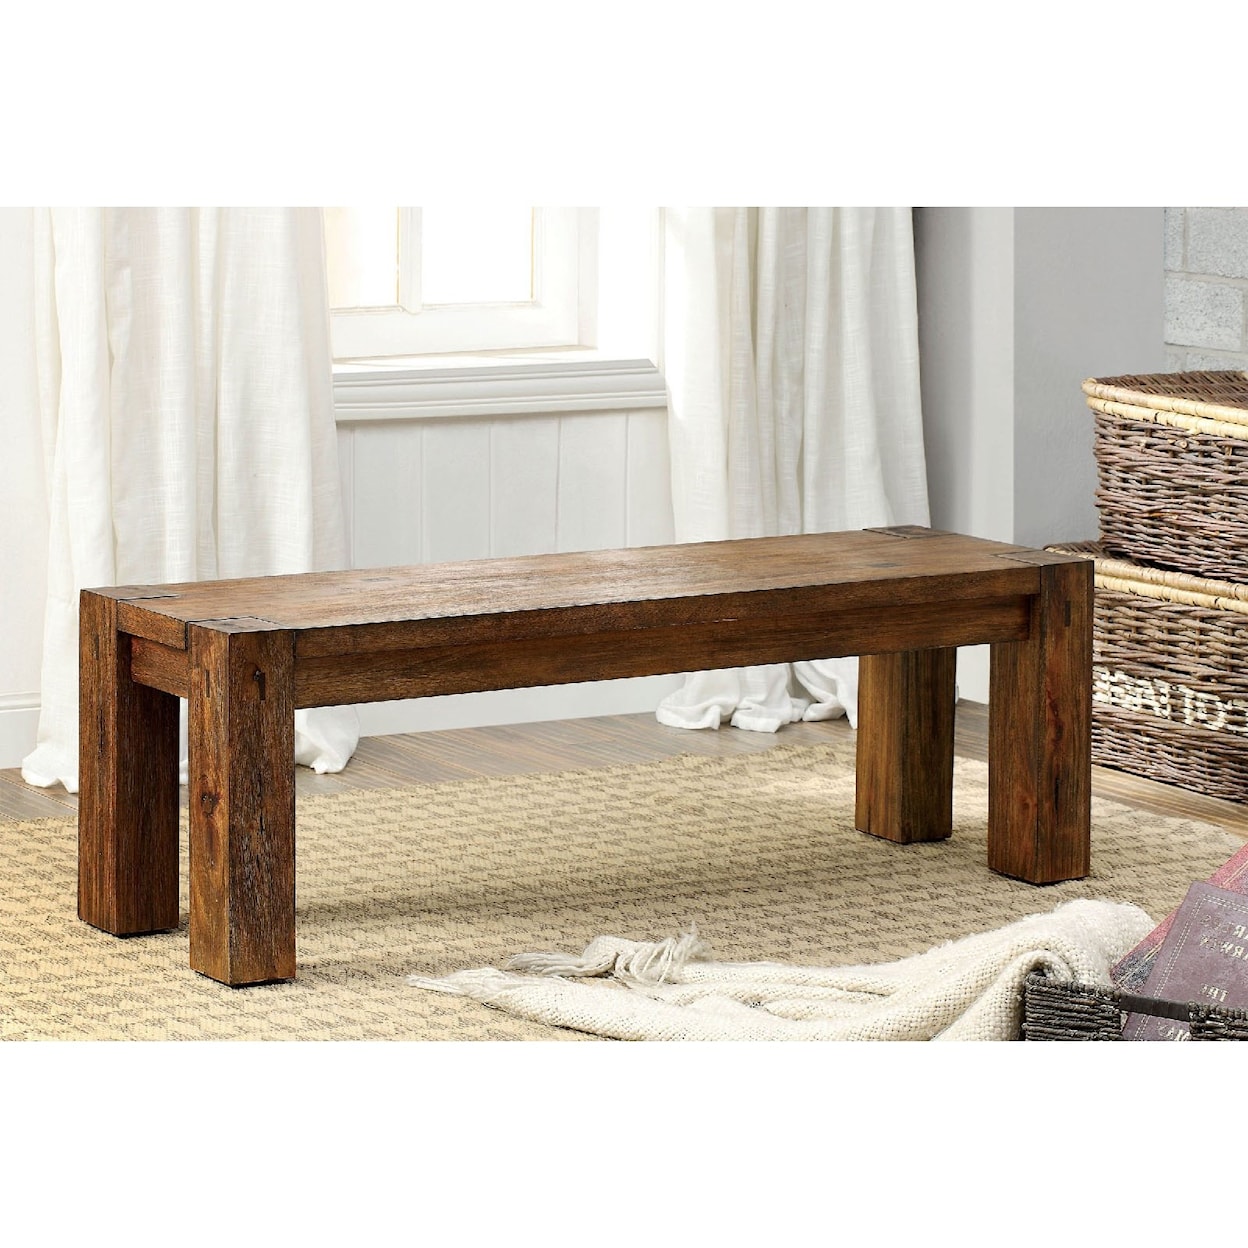 Furniture of America Frontier Bench